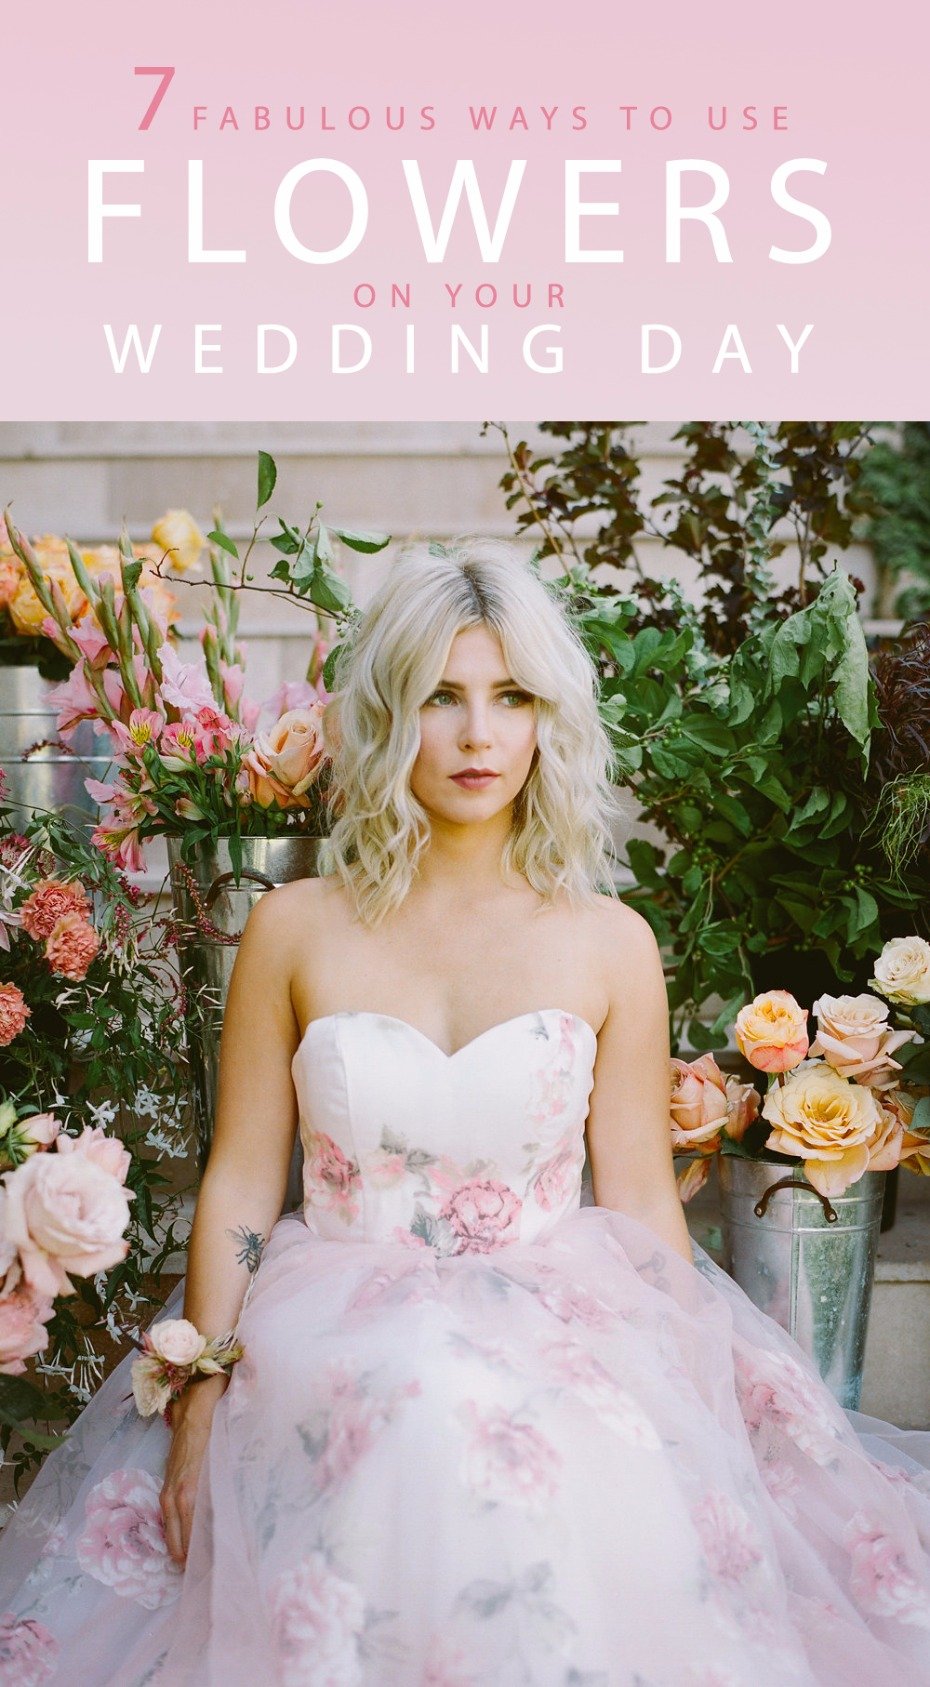 7 fabulous ways to use flowers on your wedding day